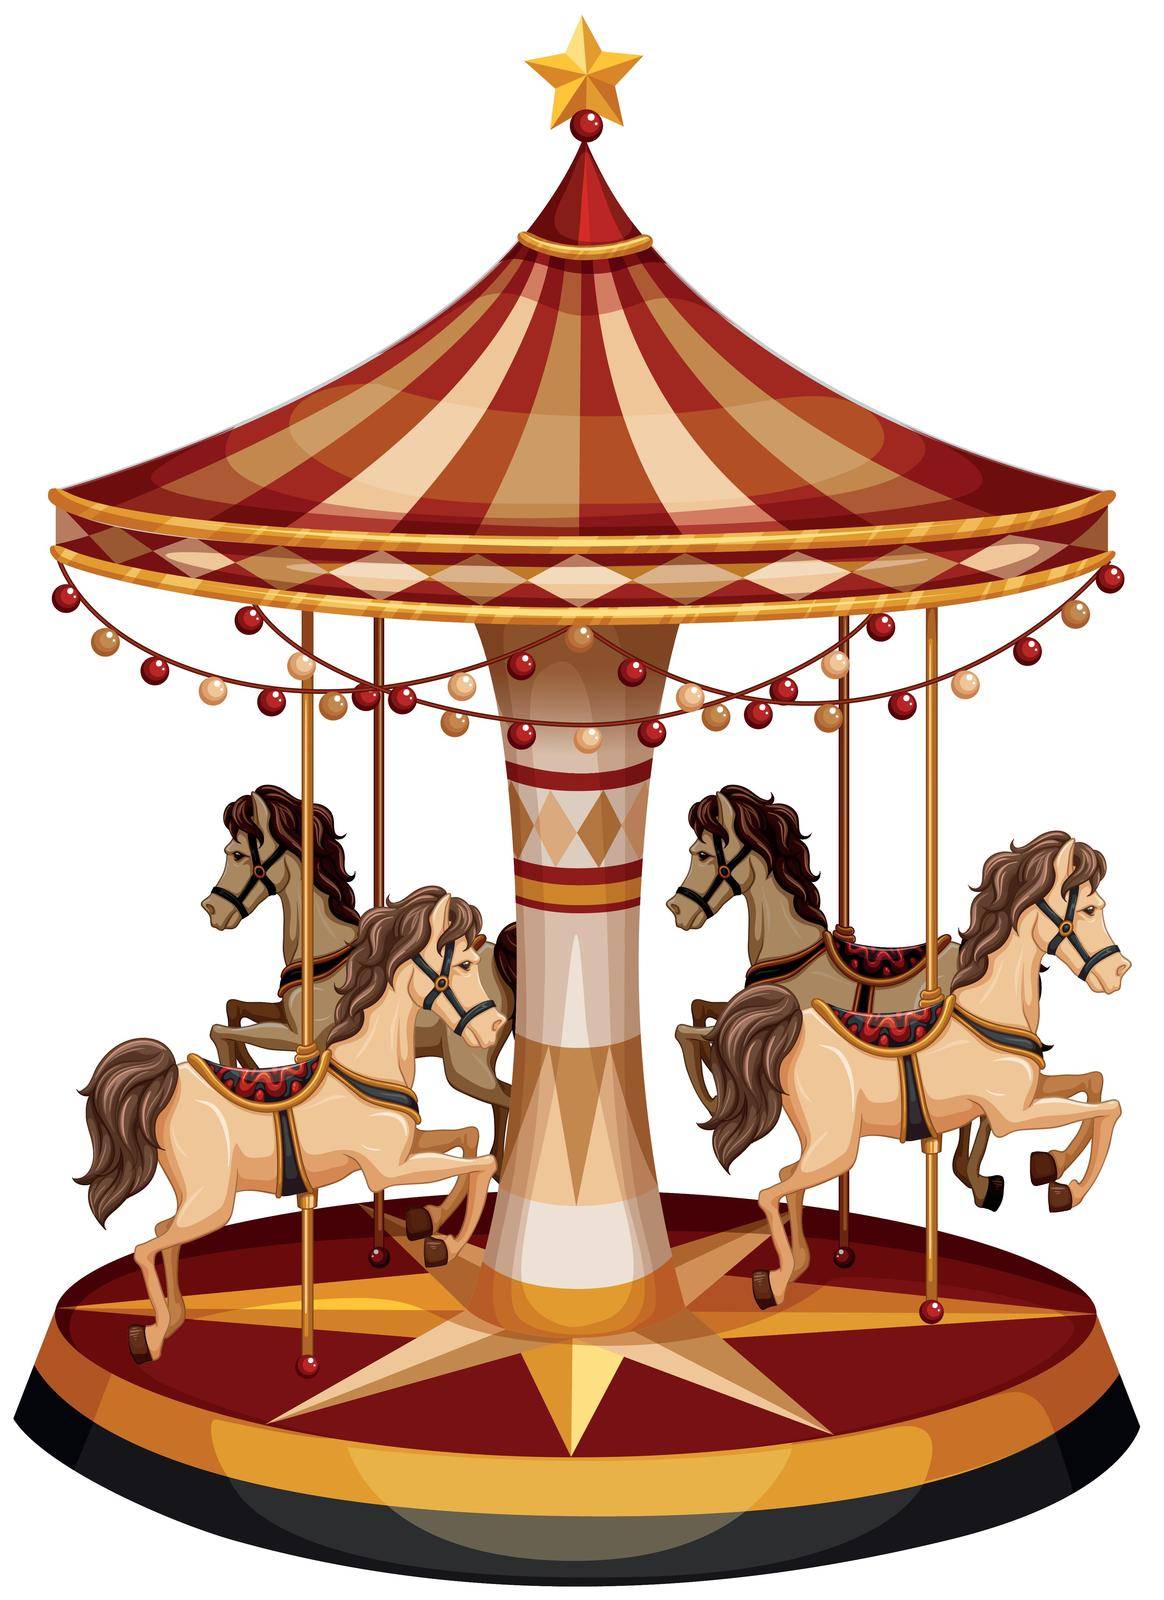 A merry-go-round with brown horses by iimages